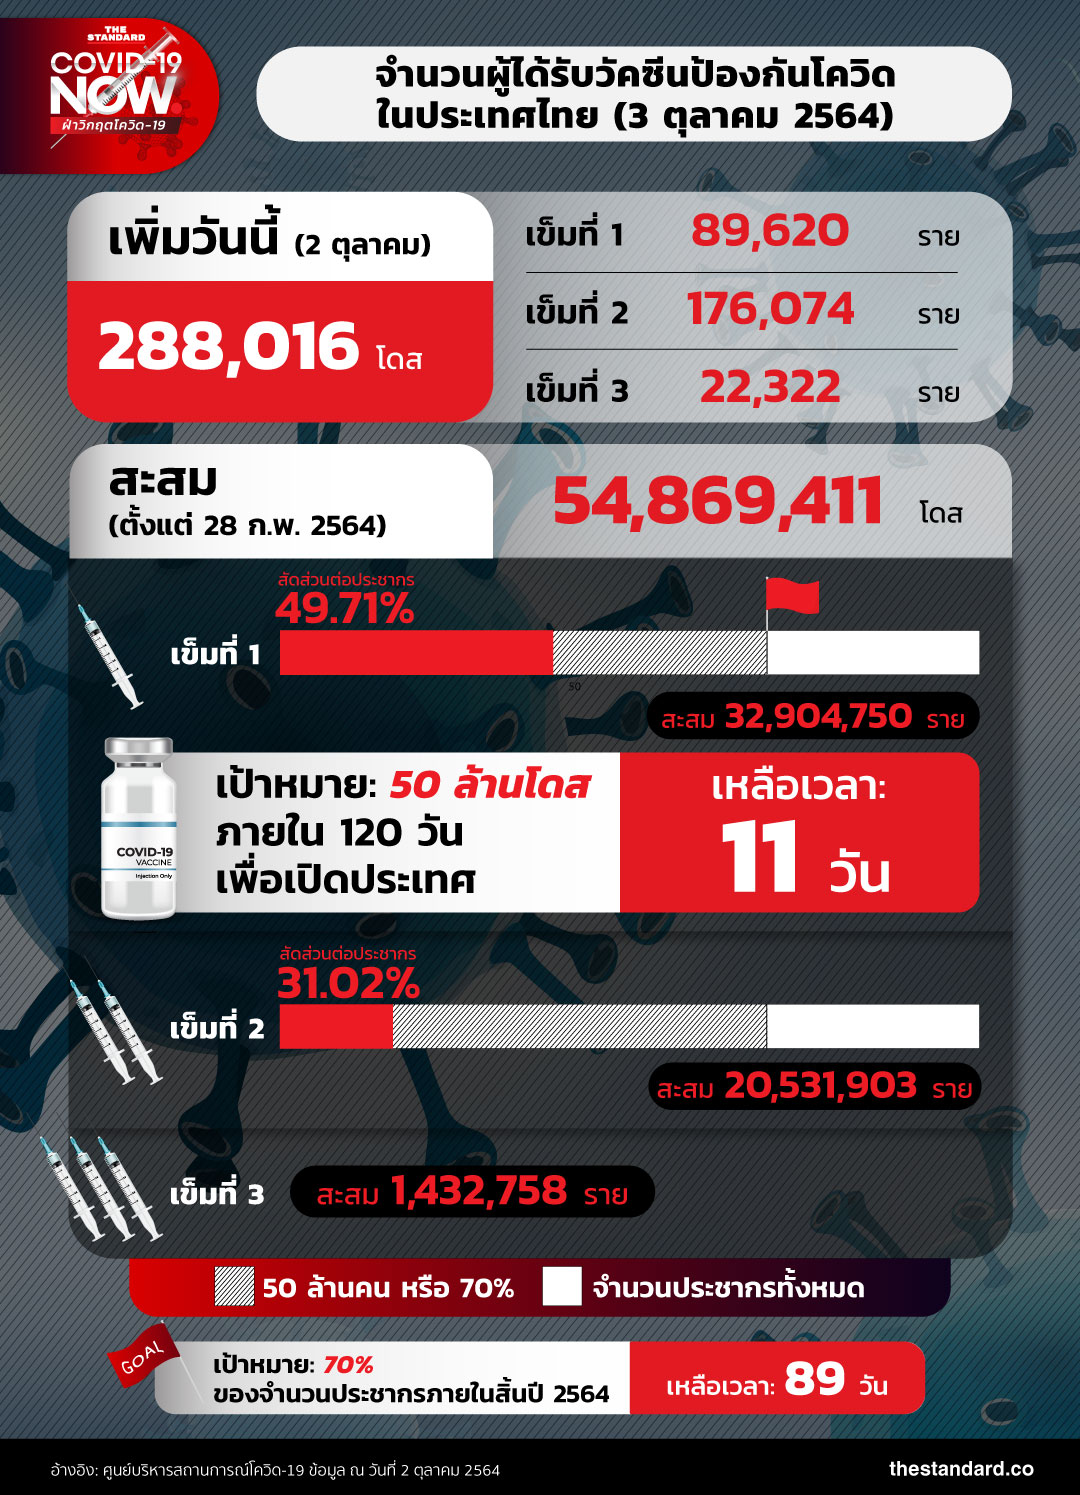 number-of-people-got-covid-19-vaccines-in-thailand-031064